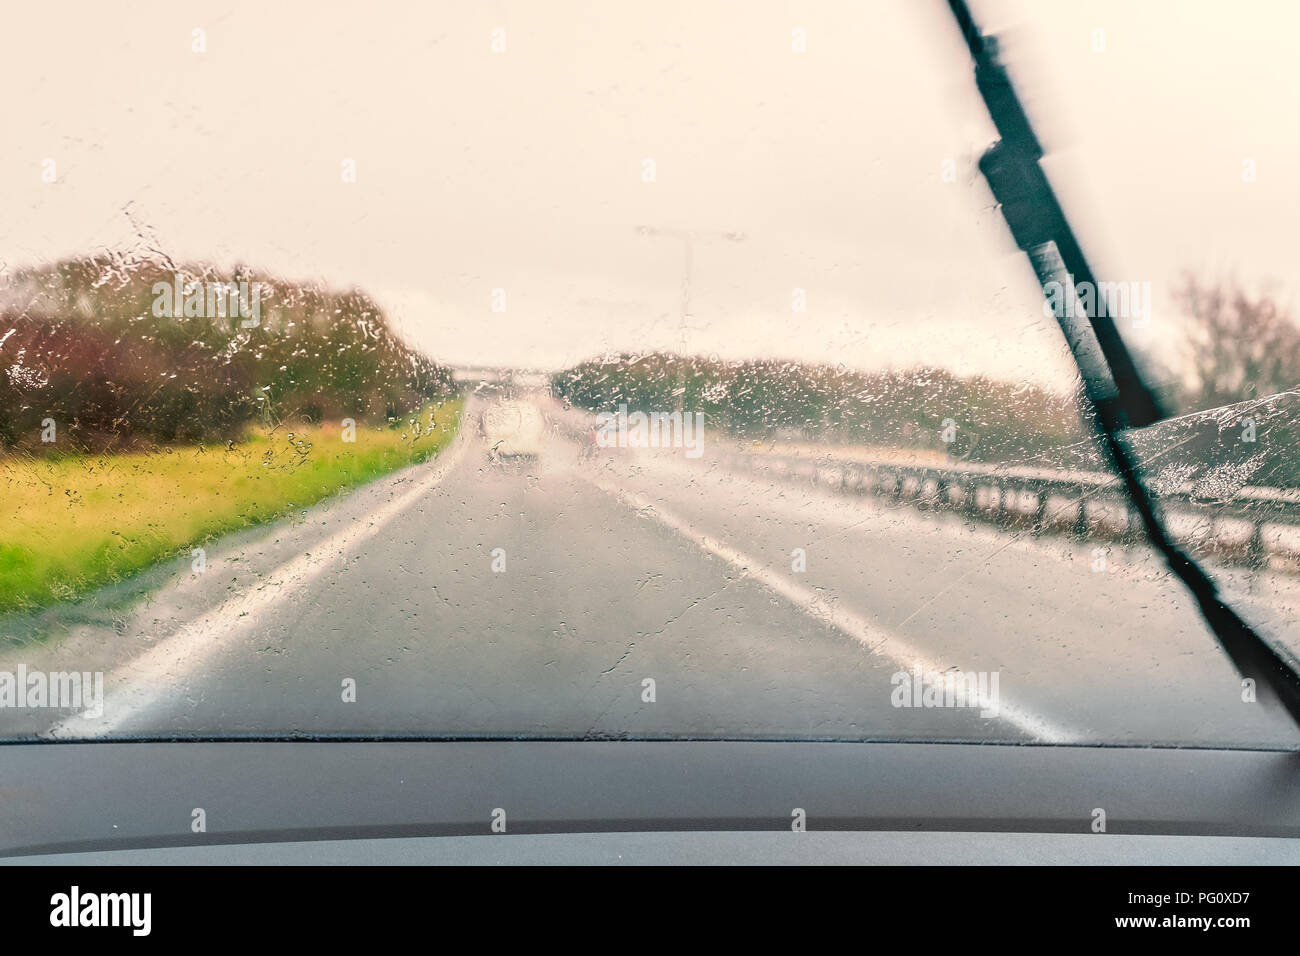 road seen through a wet windscreen whilst driving in the rain. One wiper can be seen moving across the windshield Stock Photo